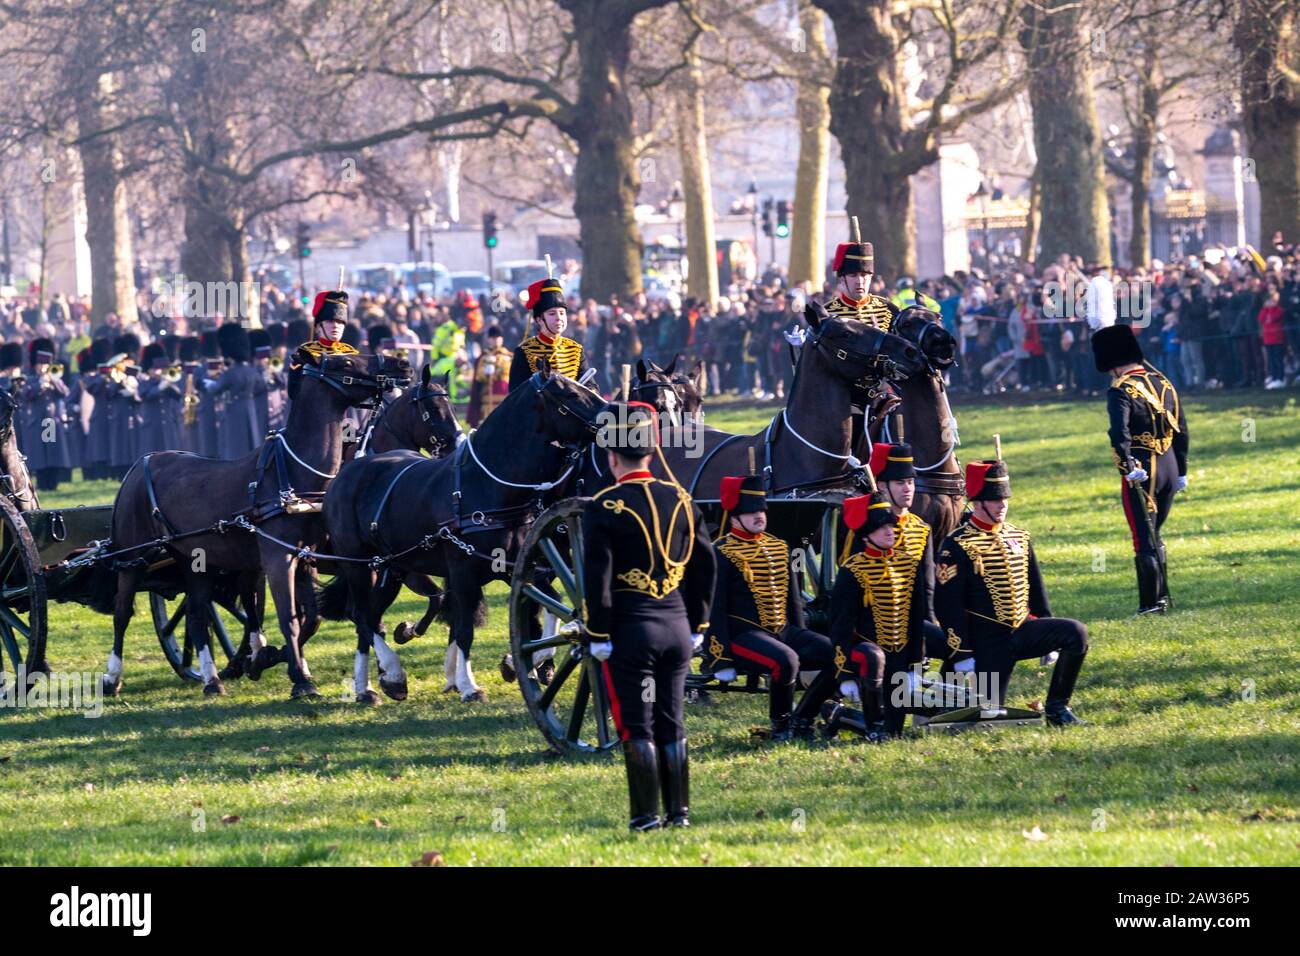 London, UK. 6th Feb, 2020. The King's Troop Royal Horse Artillery, wearing immaculately presented full dress uniform, provide a colourful sight when they ride their horses and gun carriages at The Green Park to stage a 41 Gun Royal Salute to mark the 68th Anniversary of the Accession of Her Majesty The Queen. Credit: Ian Davidson/Alamy Live News Stock Photo